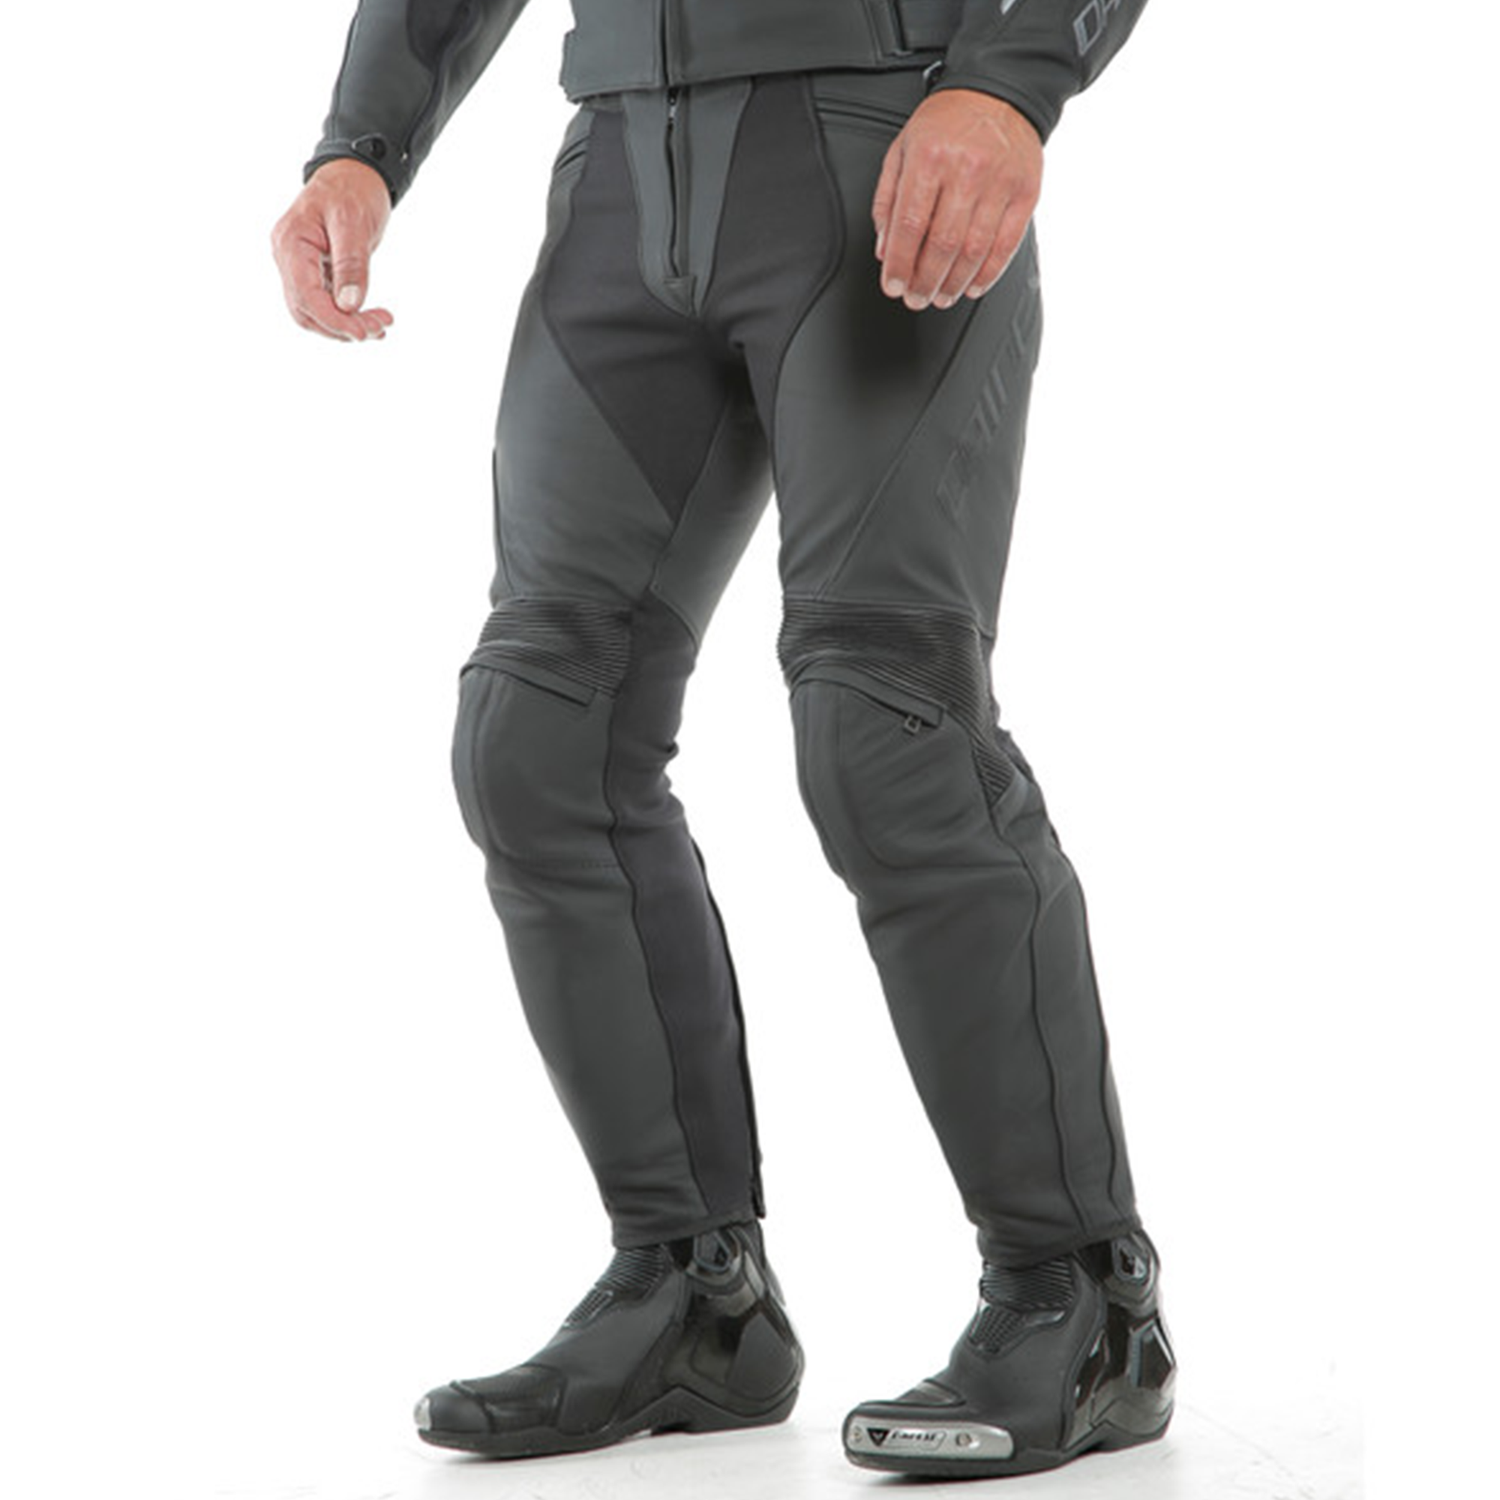 Equivalent To Size 52/L Dainese DELTA 3 PERF. LEATHER PANTS | Pants |  Croooober